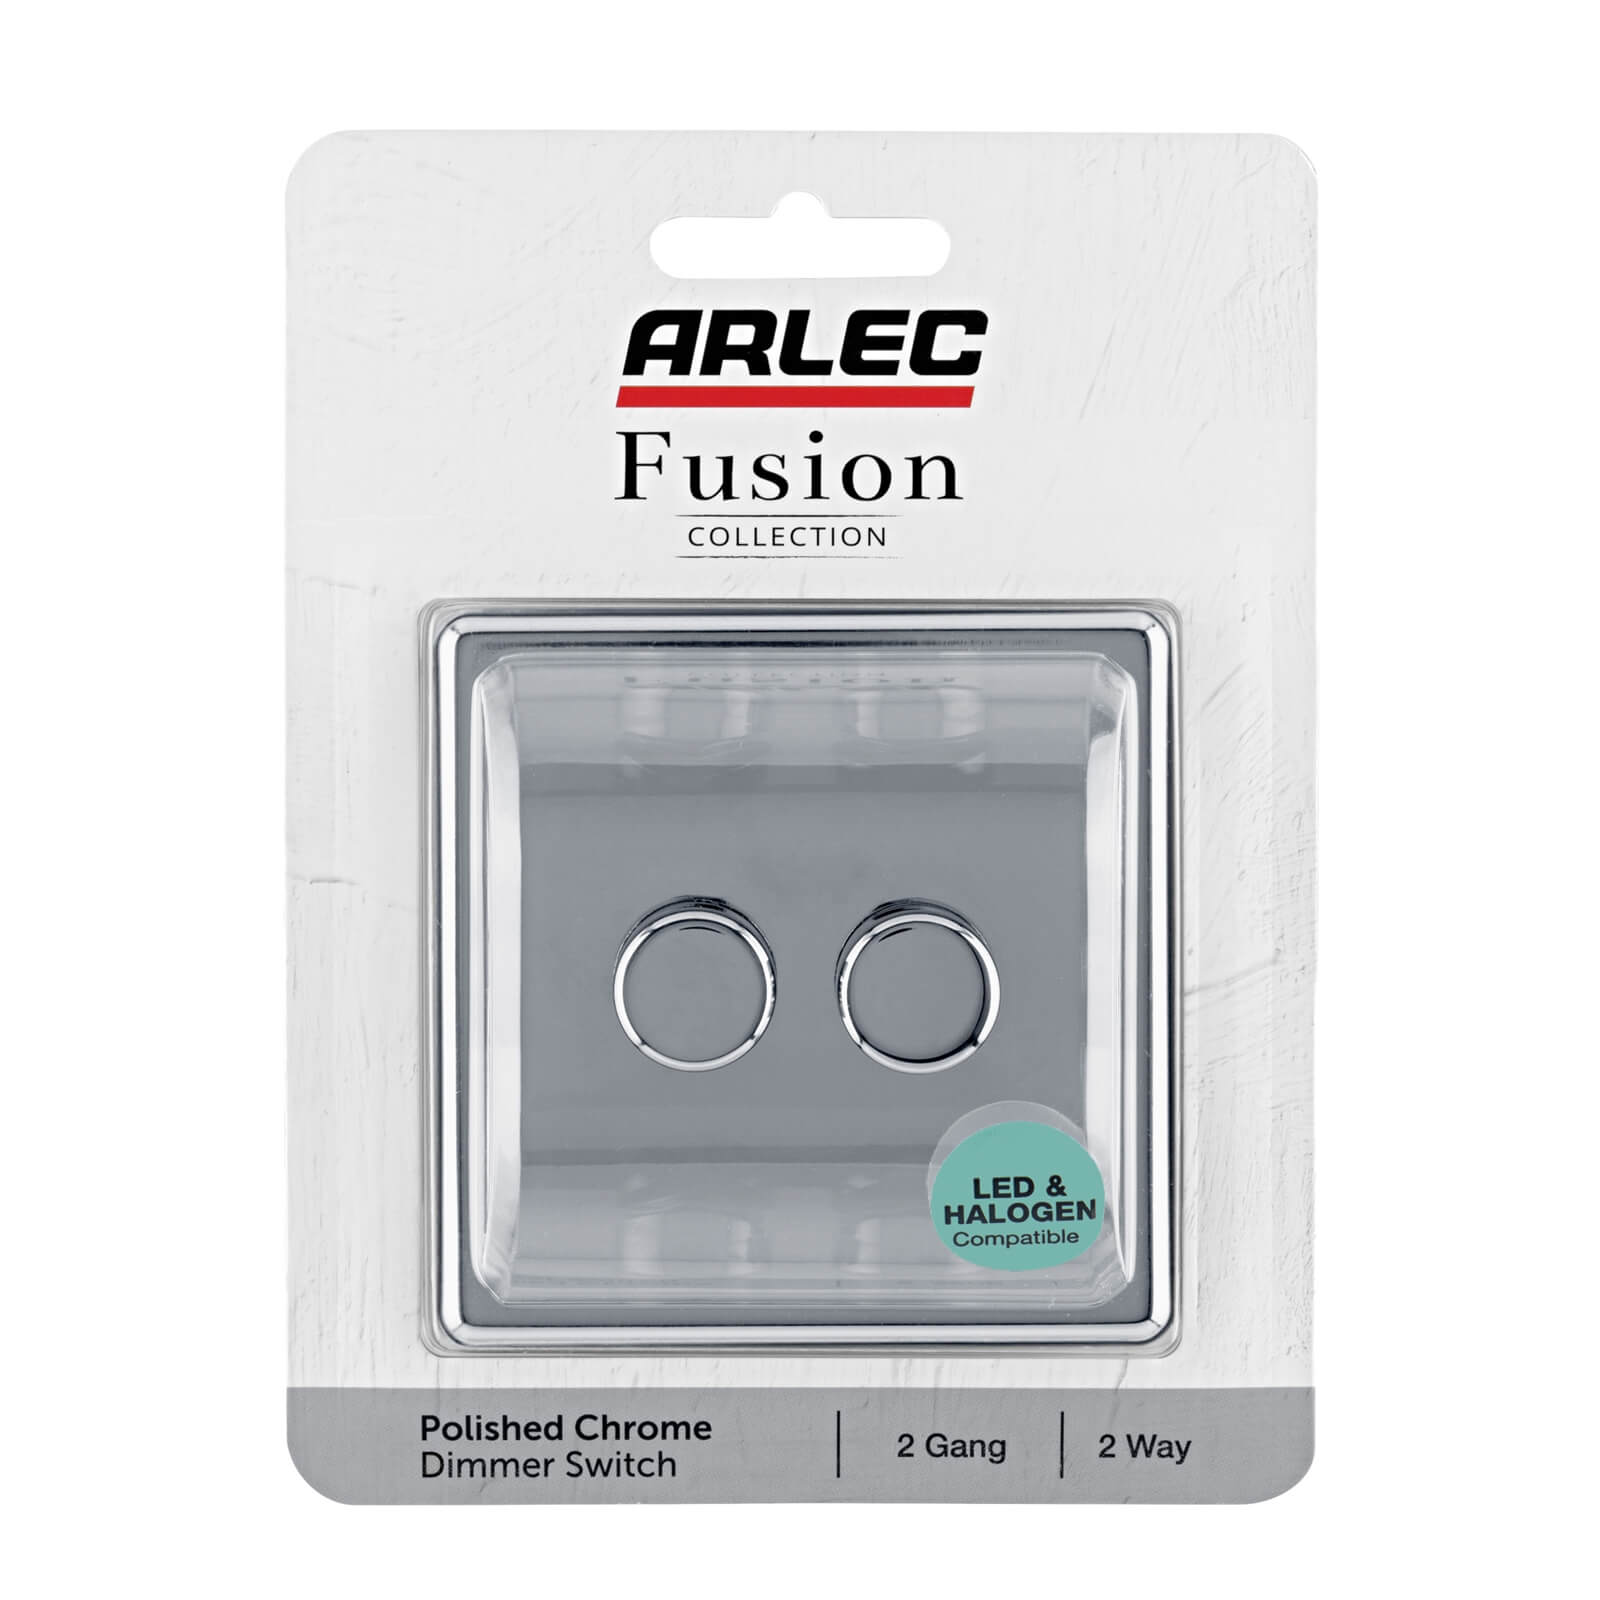 Arlec Fusion 2 Gang 2 Way Polished Chrome Dimmer switch